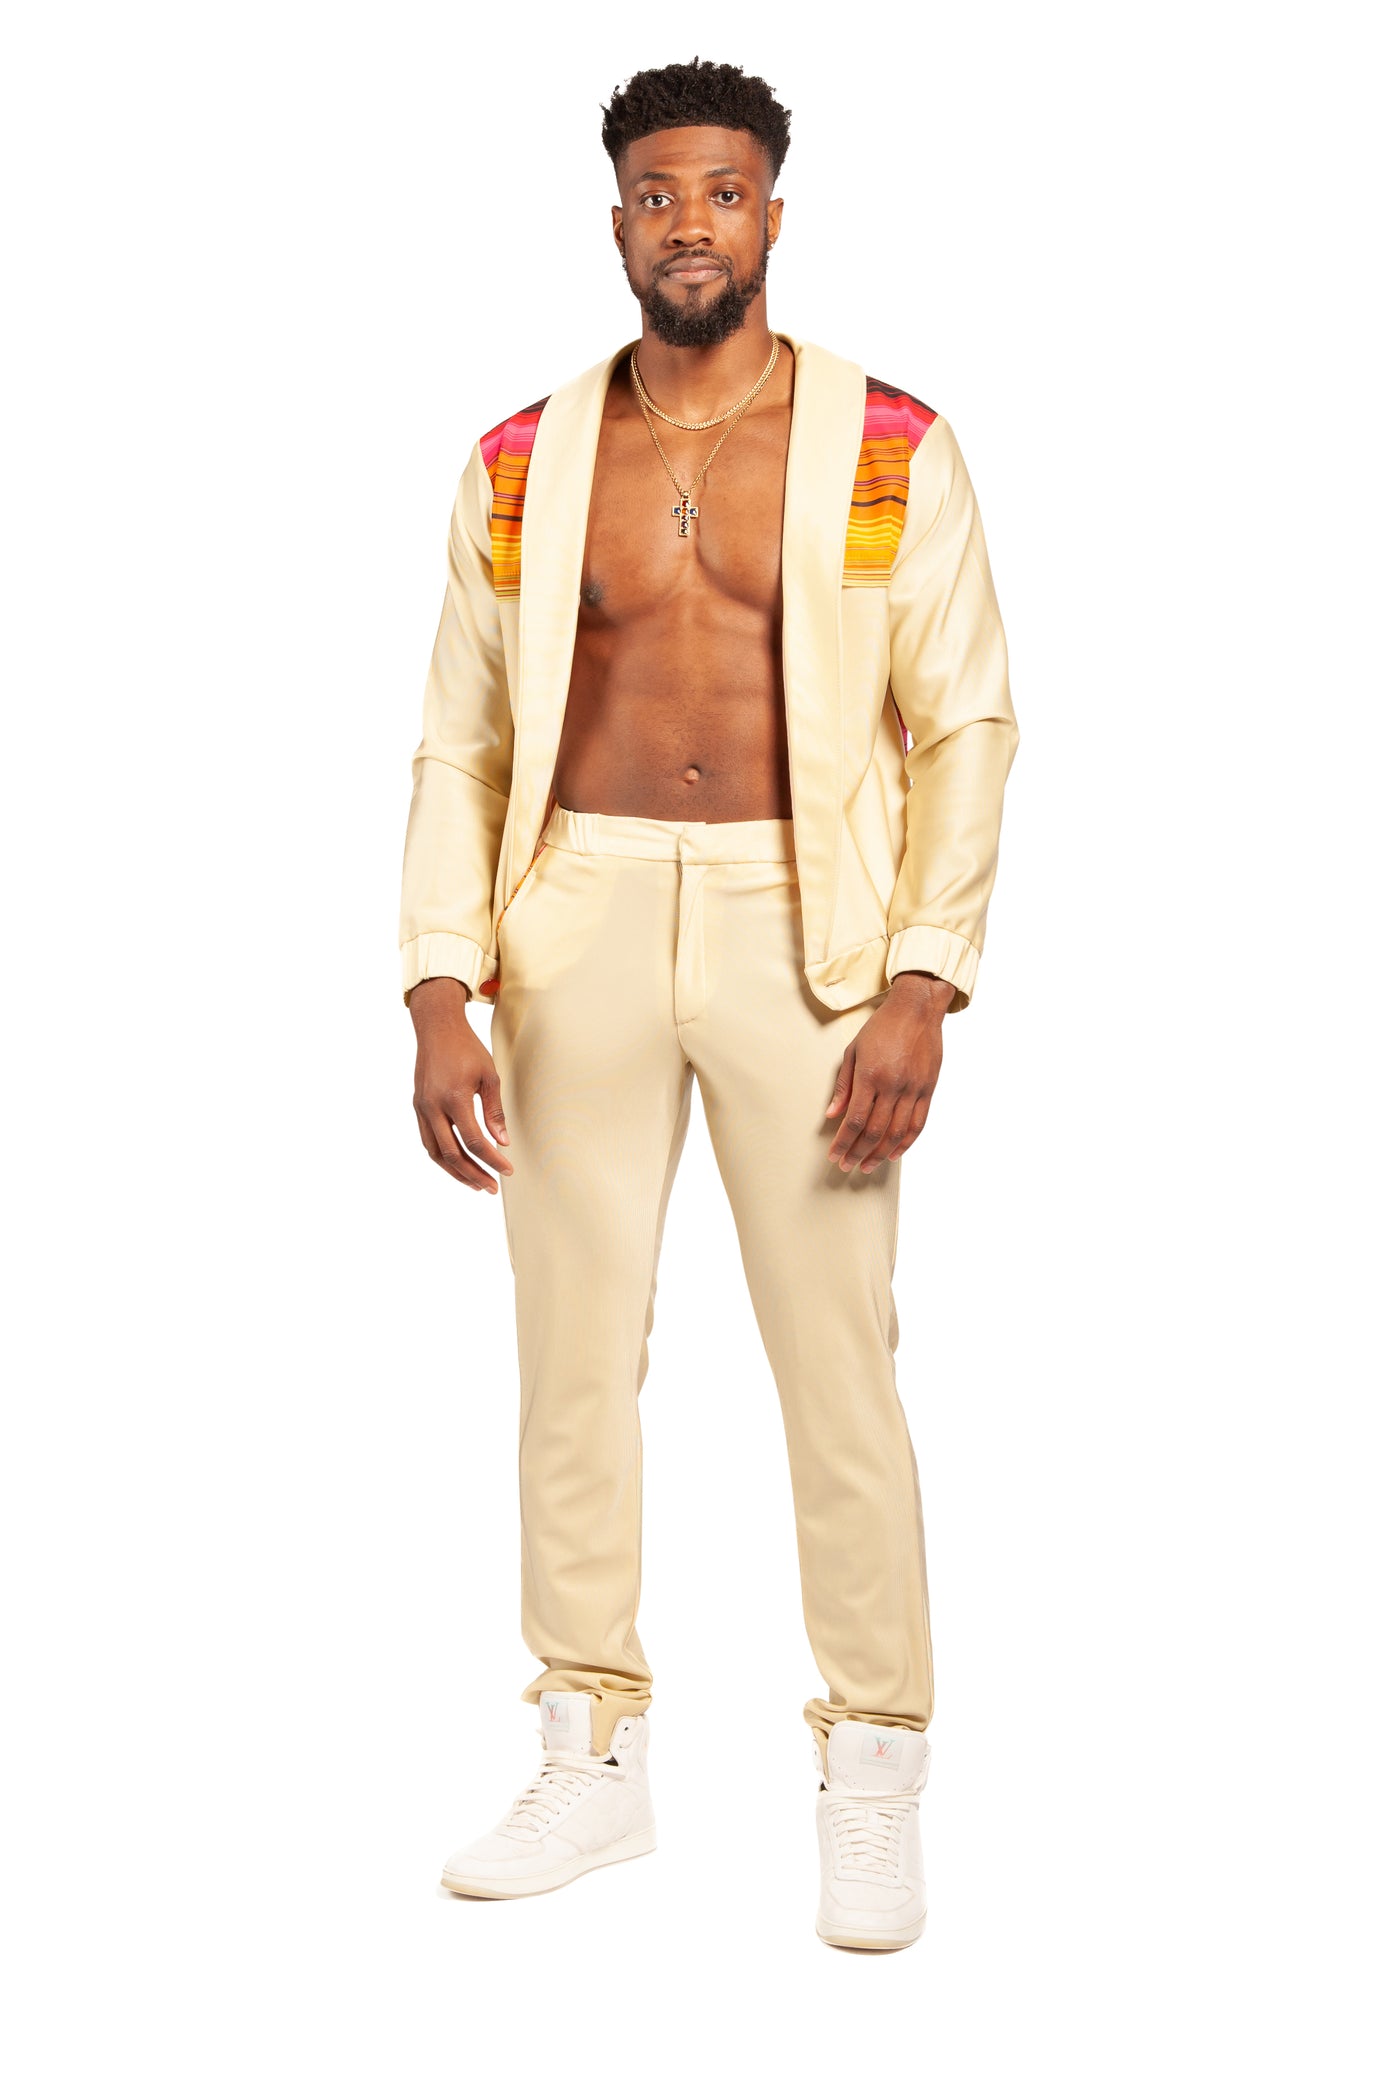 The Yellow Multi Colored Bobby Bottoms